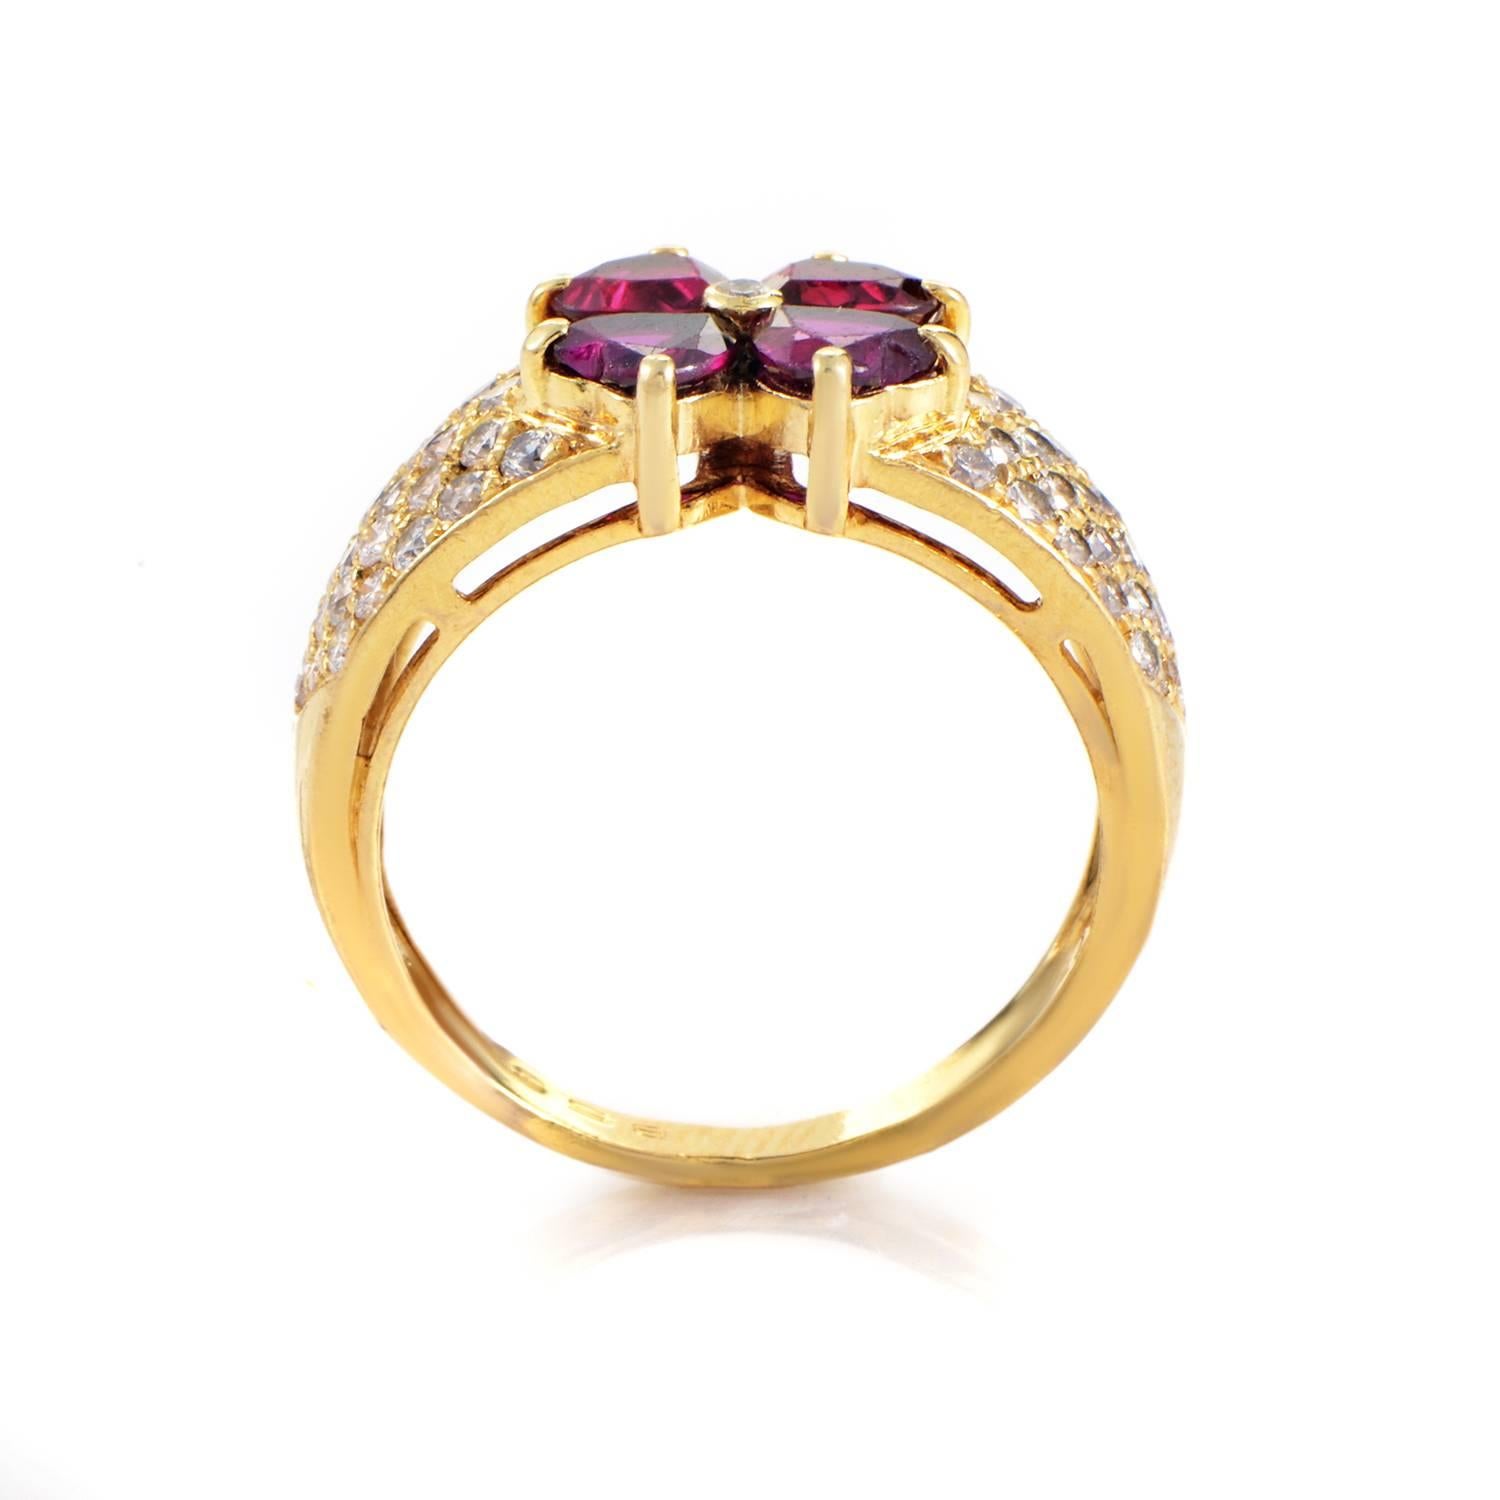 A charming floral motif in this gorgeous 18K yellow gold ring from Van Cleef & Arpels is comprised of heart-shaped rubies amounting to 1.00 carat and glistening diamonds weighing in total 0.85ct for a glaring allure.
Ring Size: 6.5
Included Items: